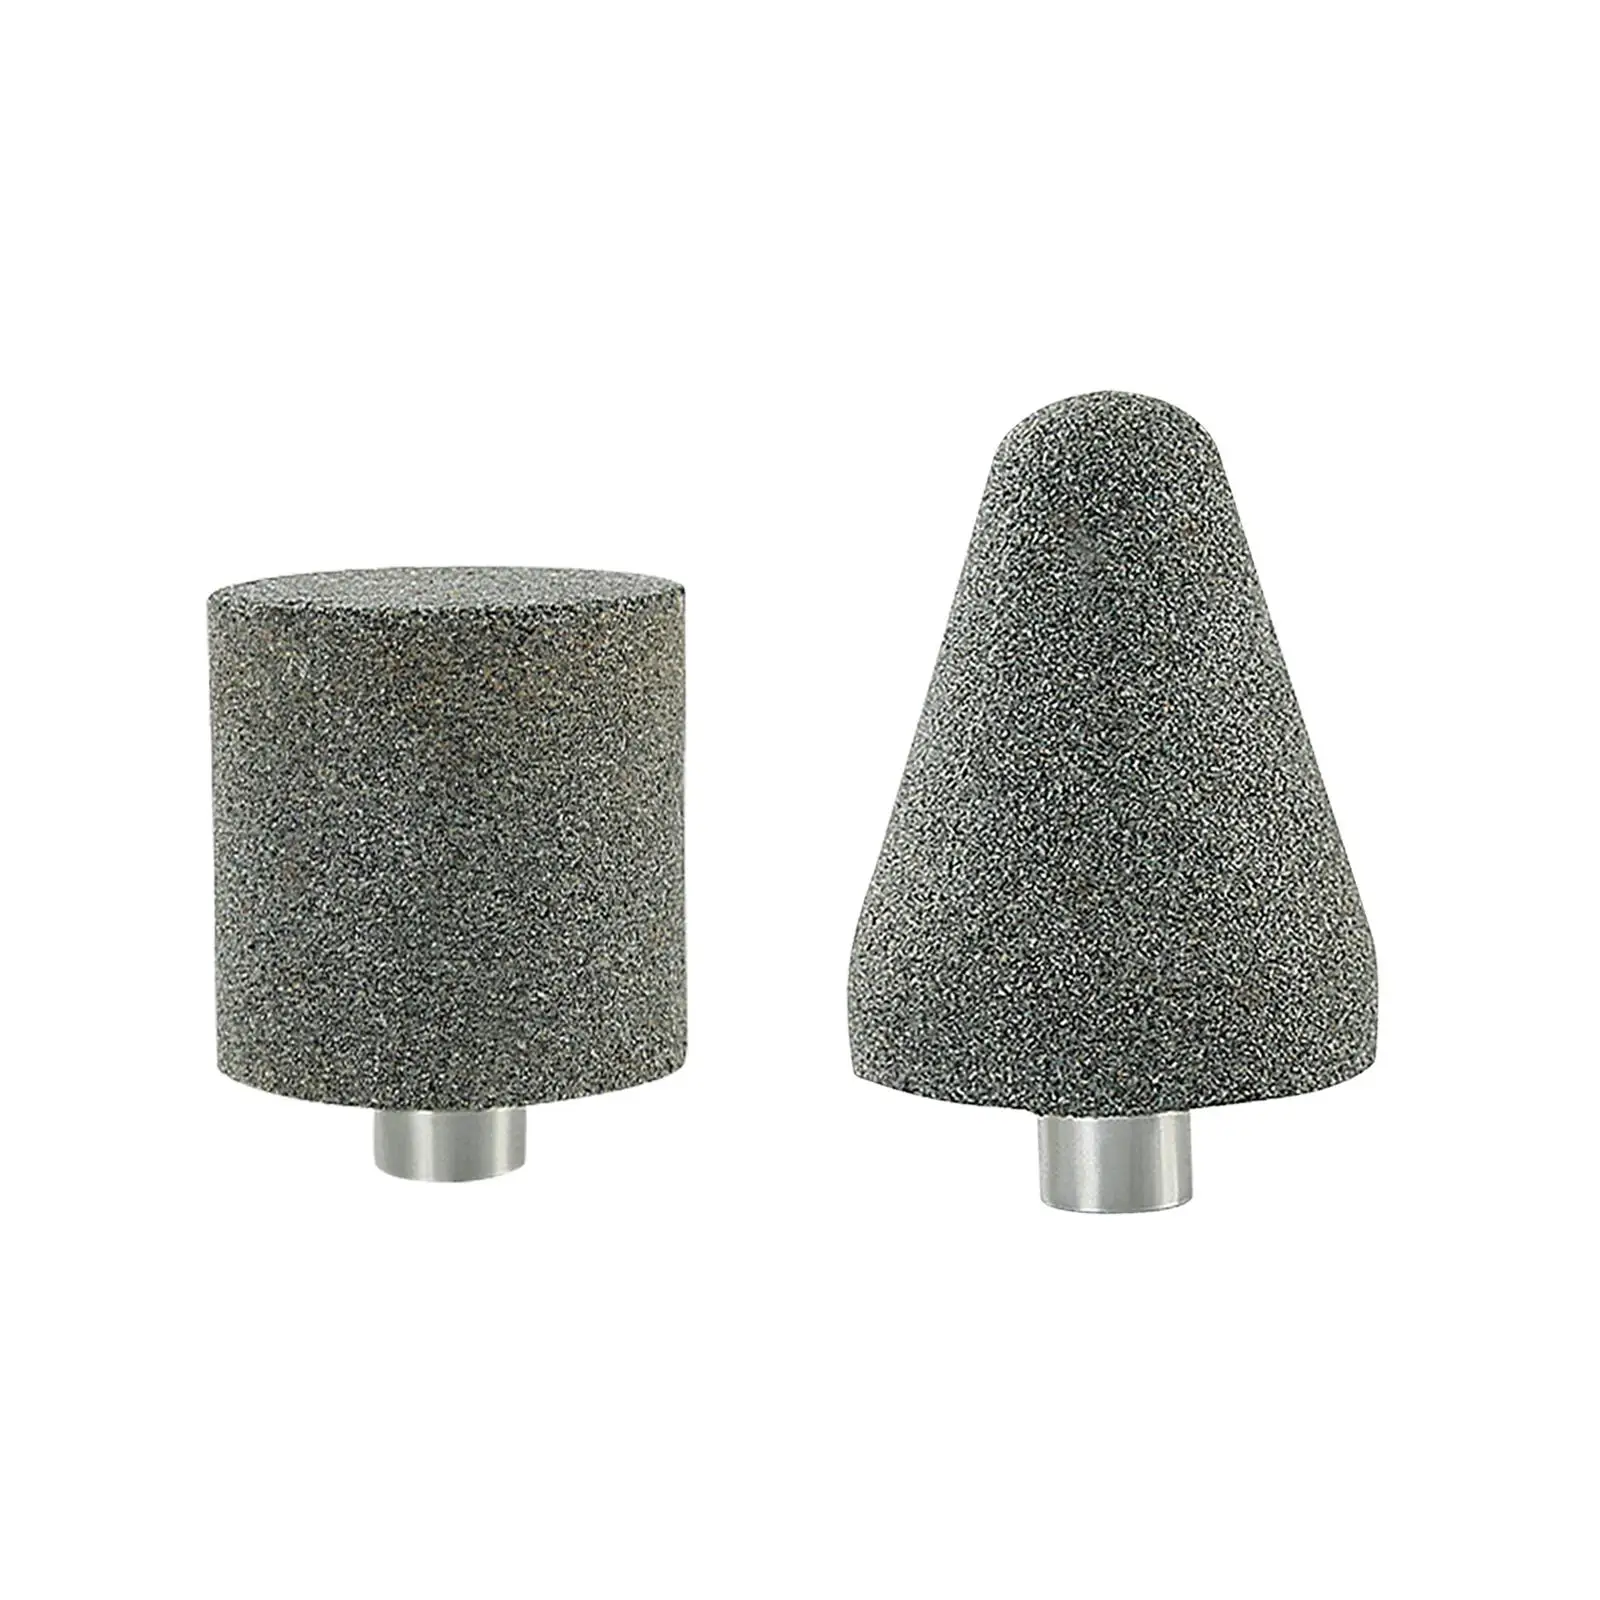 Polishing Wheel Silicon Carbide Grinding Stone Buffing Wheel for M10 Angle Grinder Cleaning Marble Bench Grinder Granite